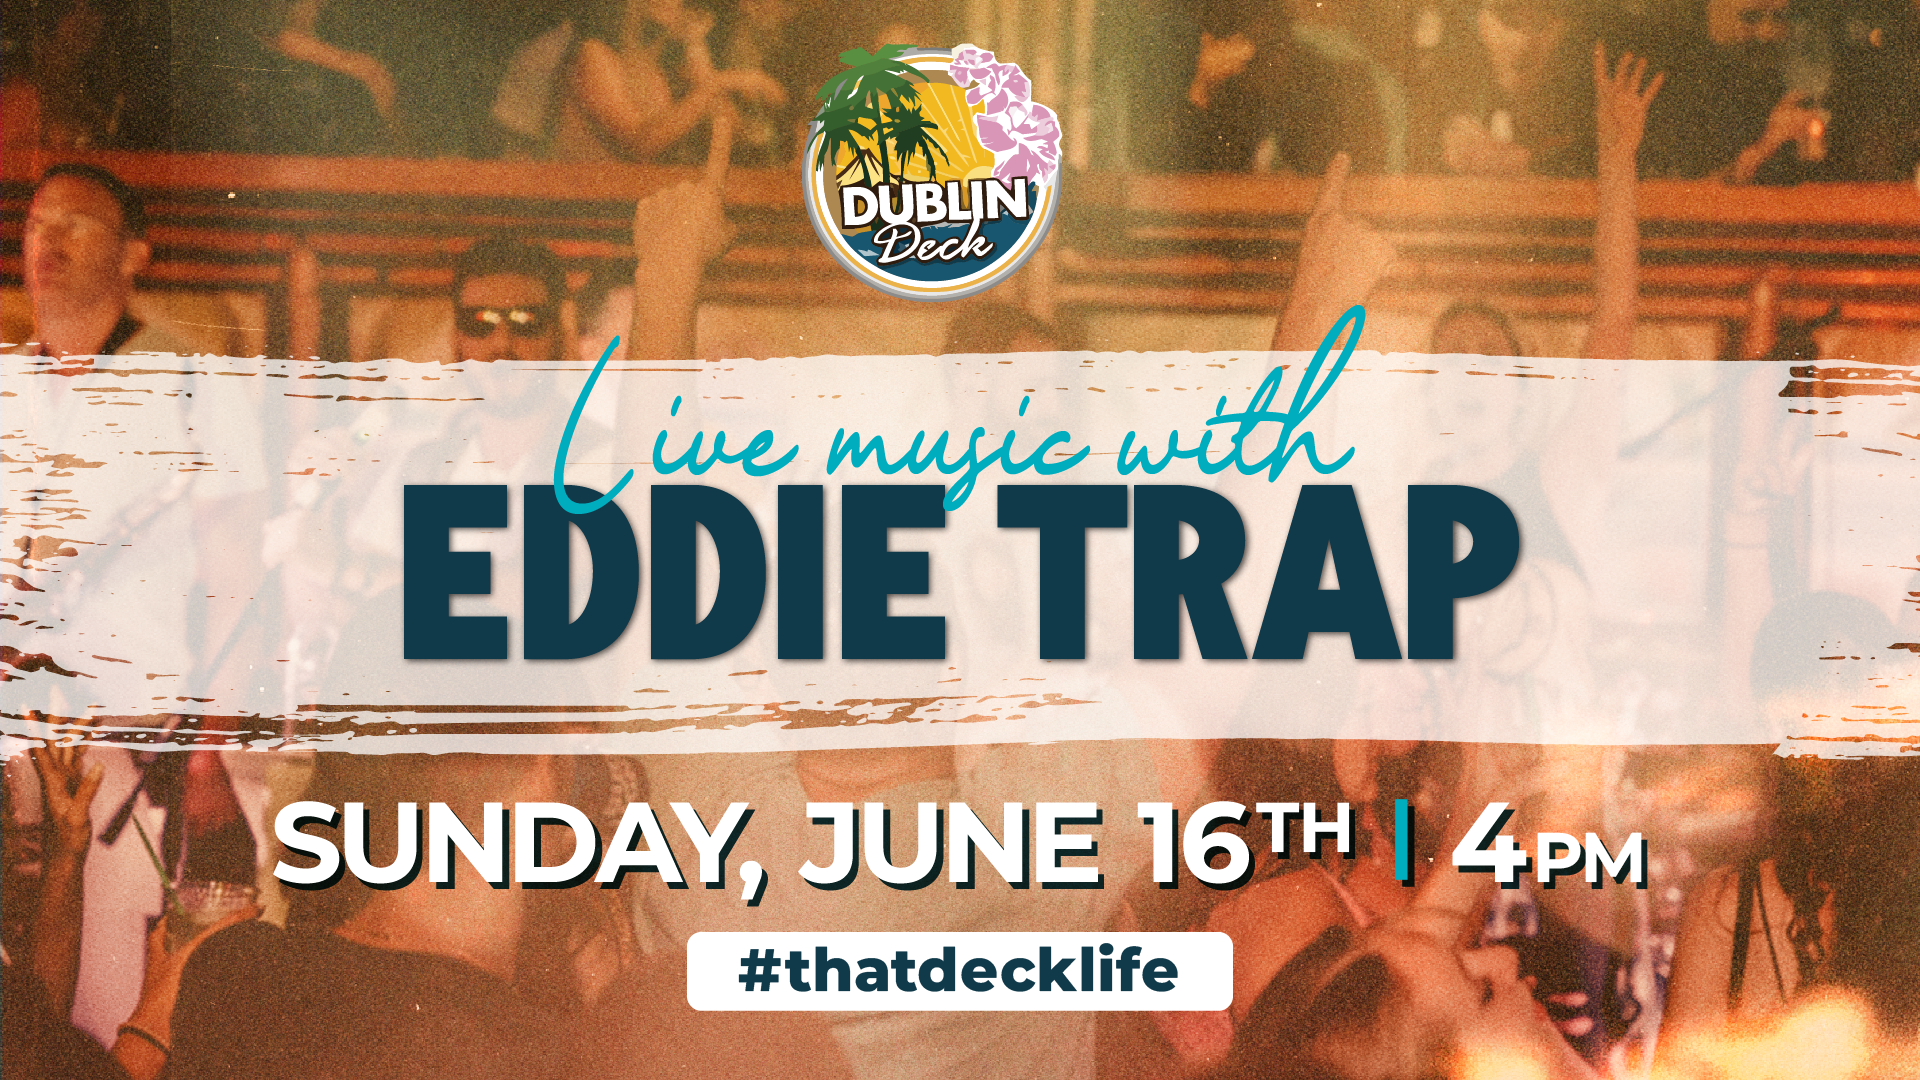 flyer for live music by eddie trap on june 16 at 4pm